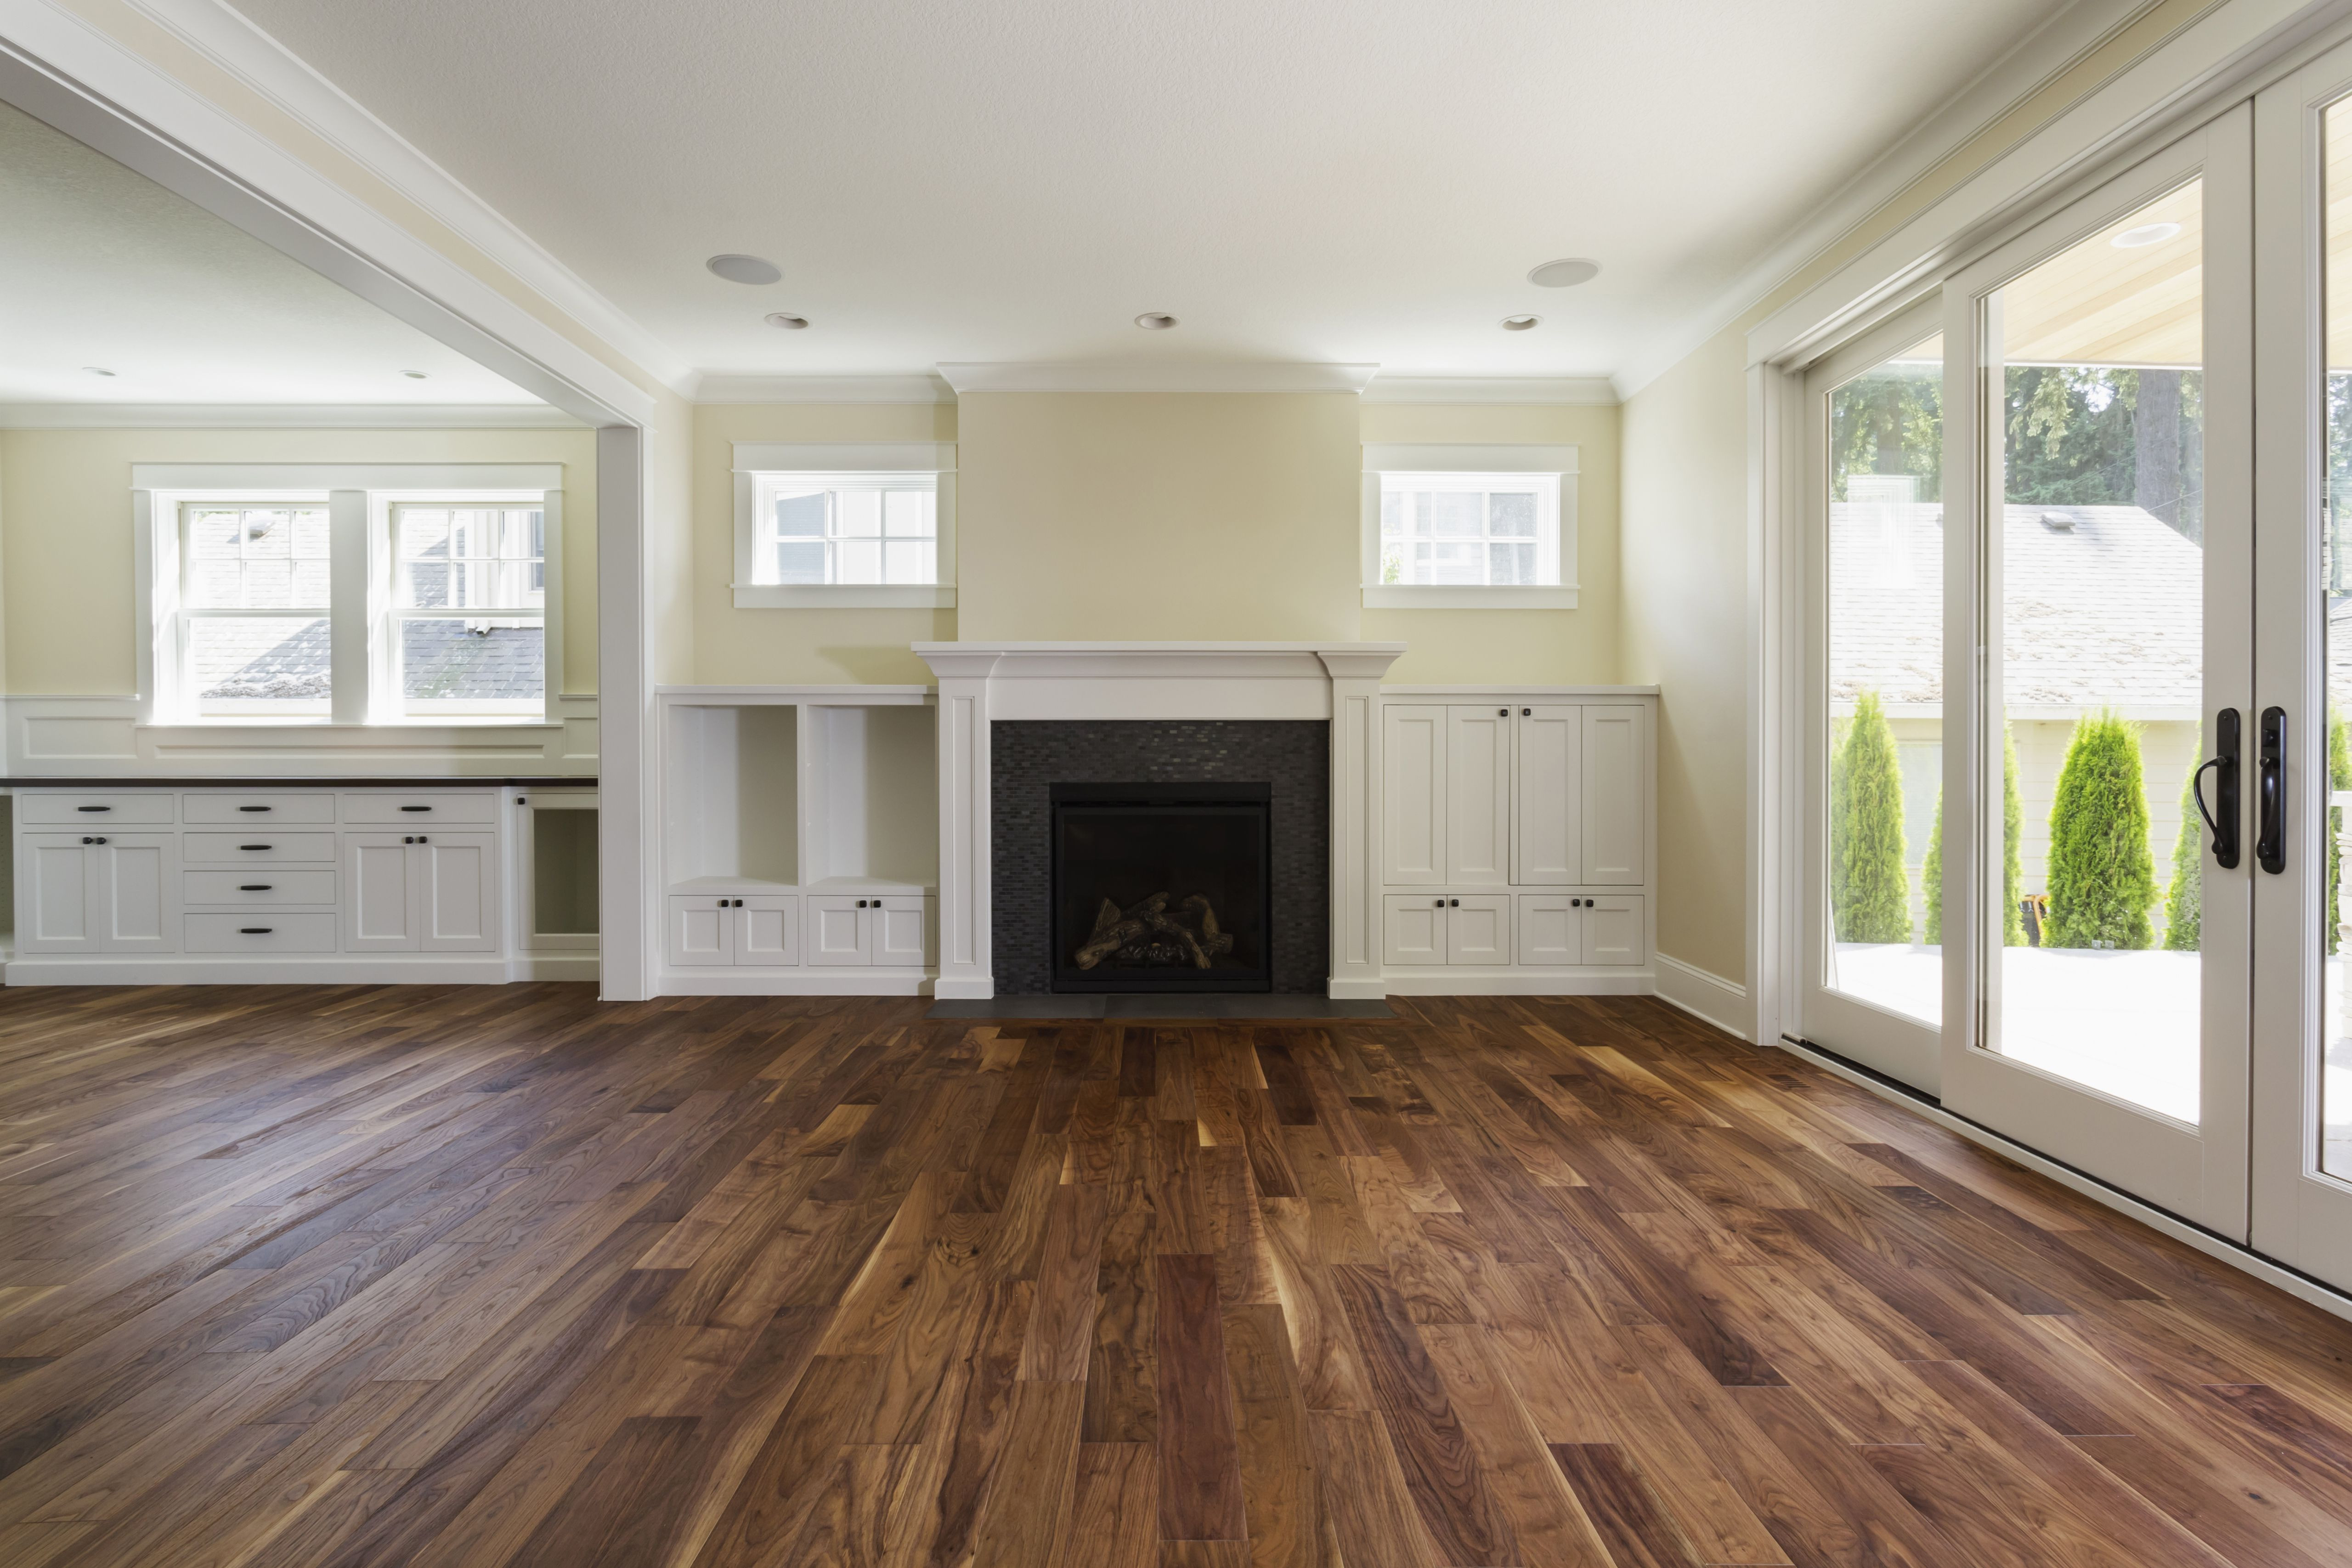 23 Fabulous How Much to Refinish Engineered Hardwood Floors 2024 free download how much to refinish engineered hardwood floors of the pros and cons of prefinished hardwood flooring in fireplace and built in shelves in living room 482143011 57bef8e33df78cc16e035397